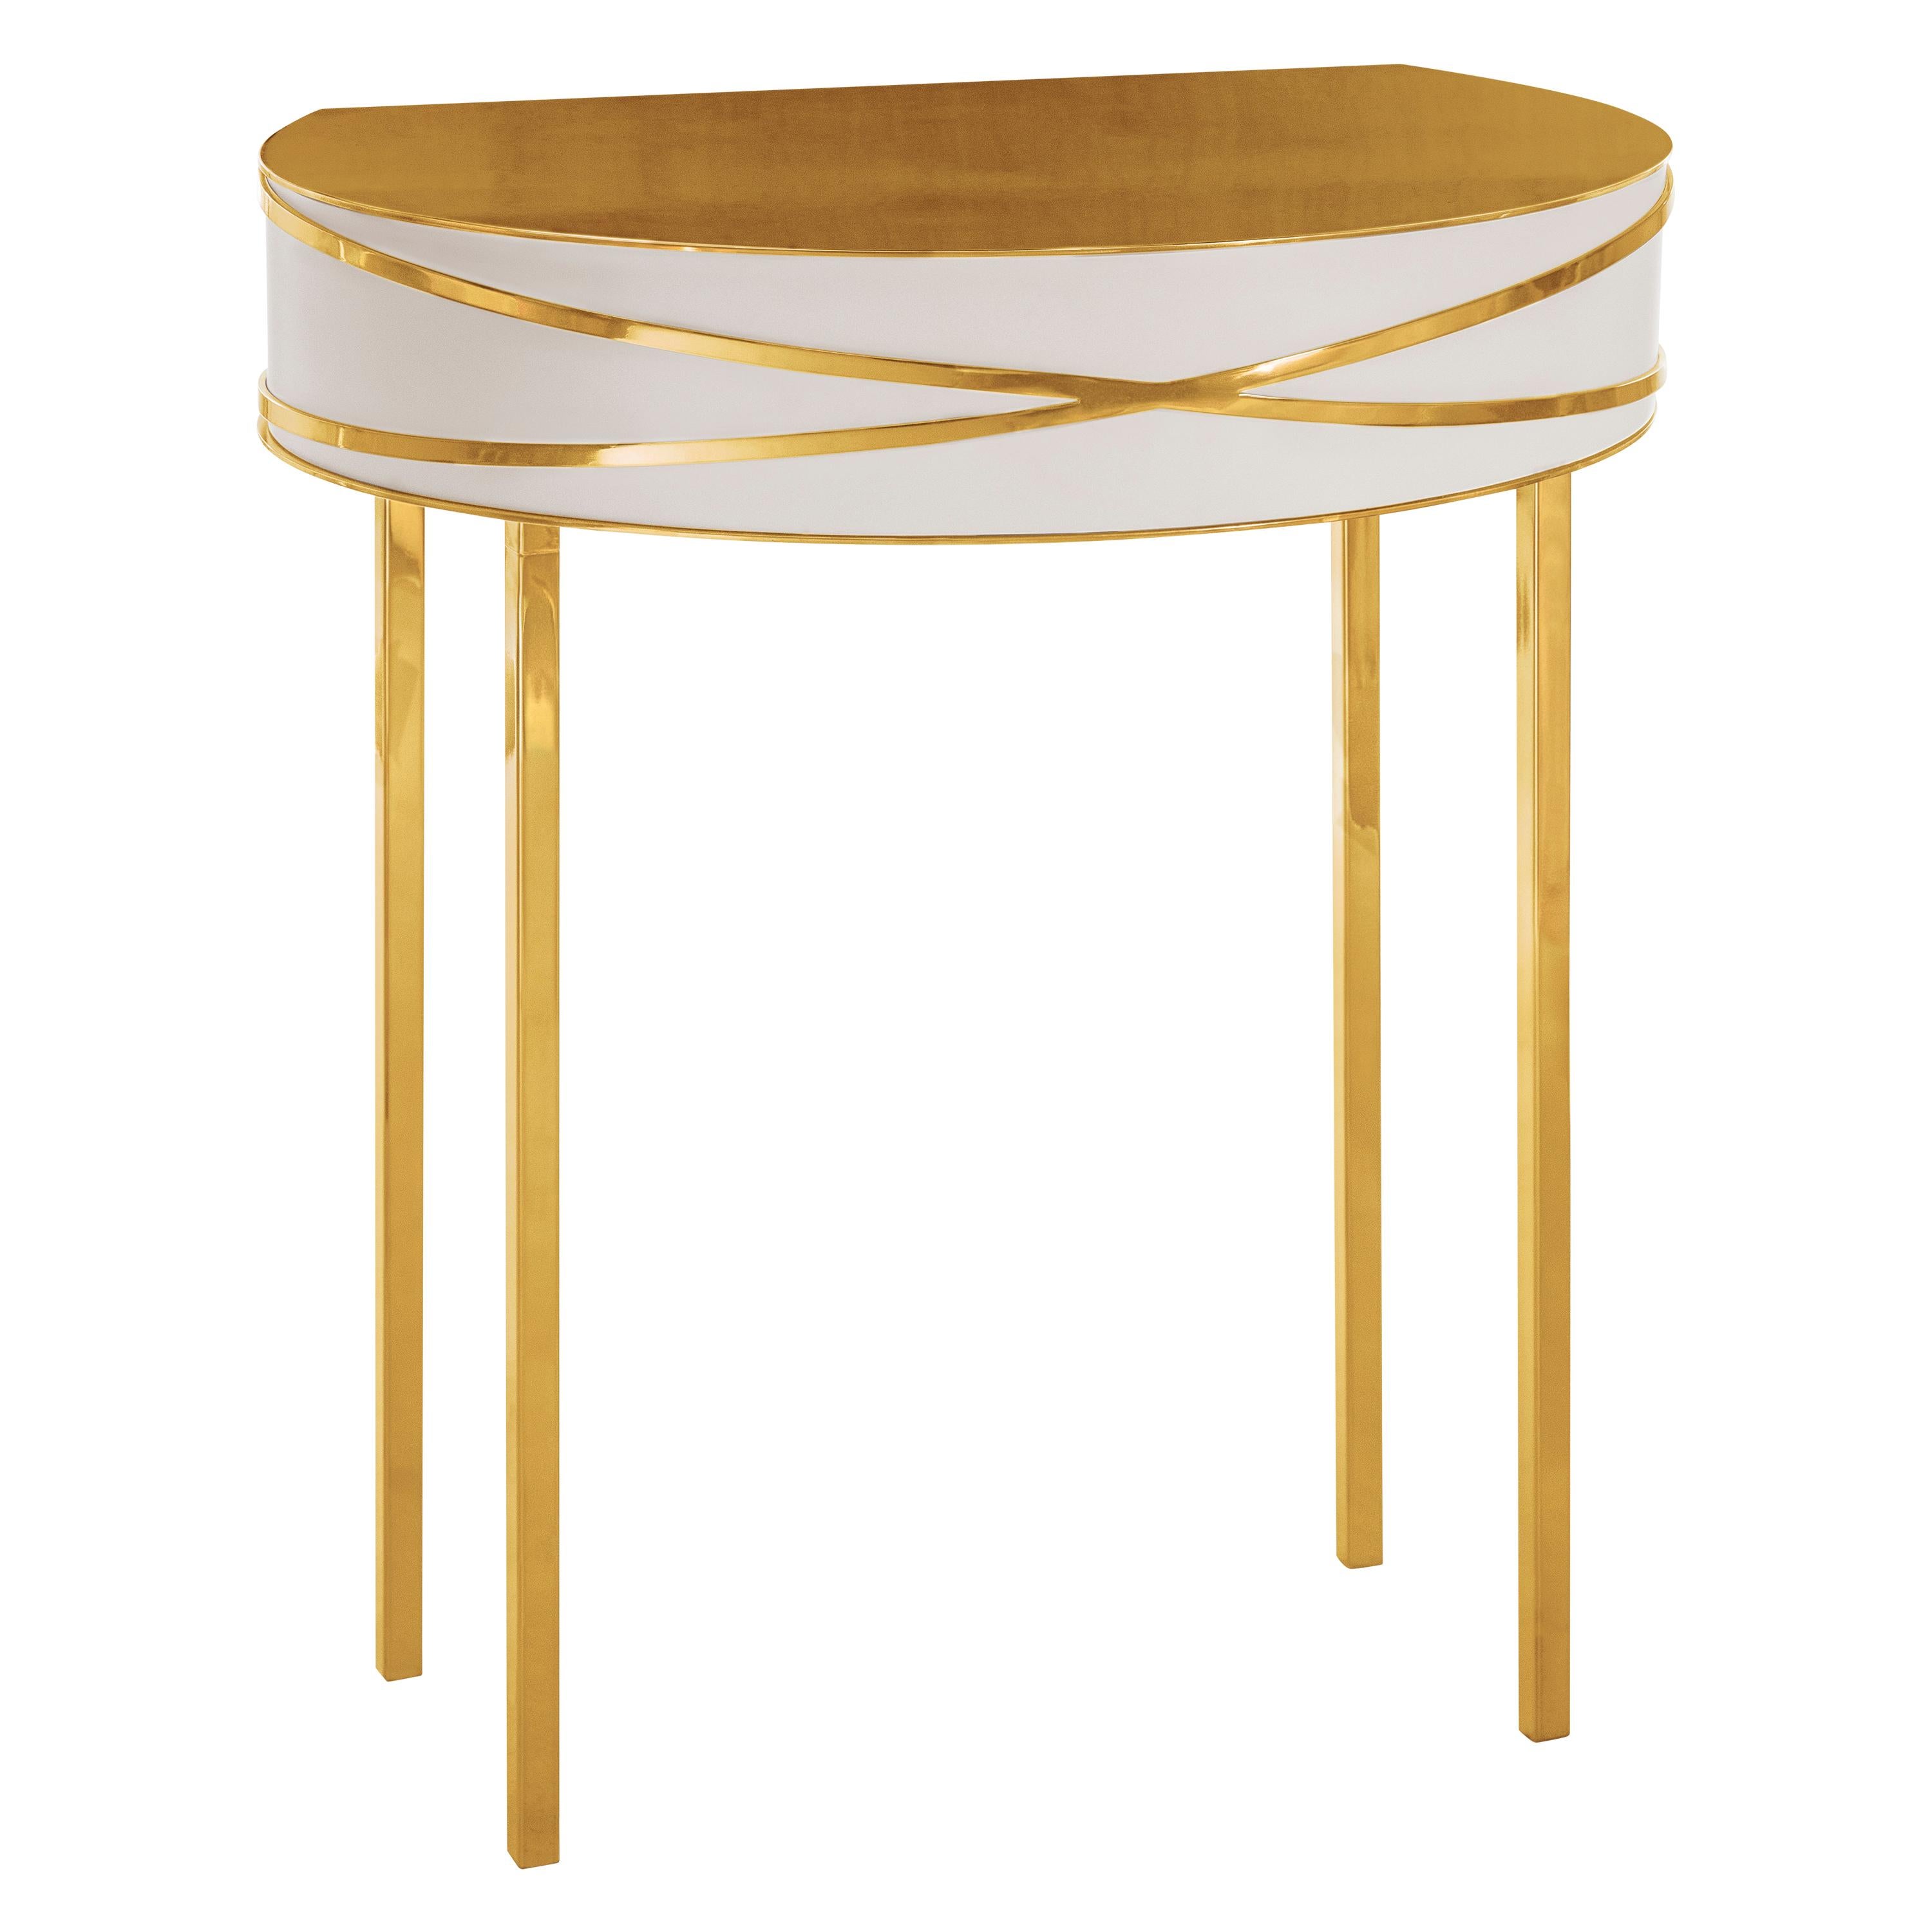 Stella Gray Console or Bedside Table with Gold Trims by Nika Zupanc For Sale